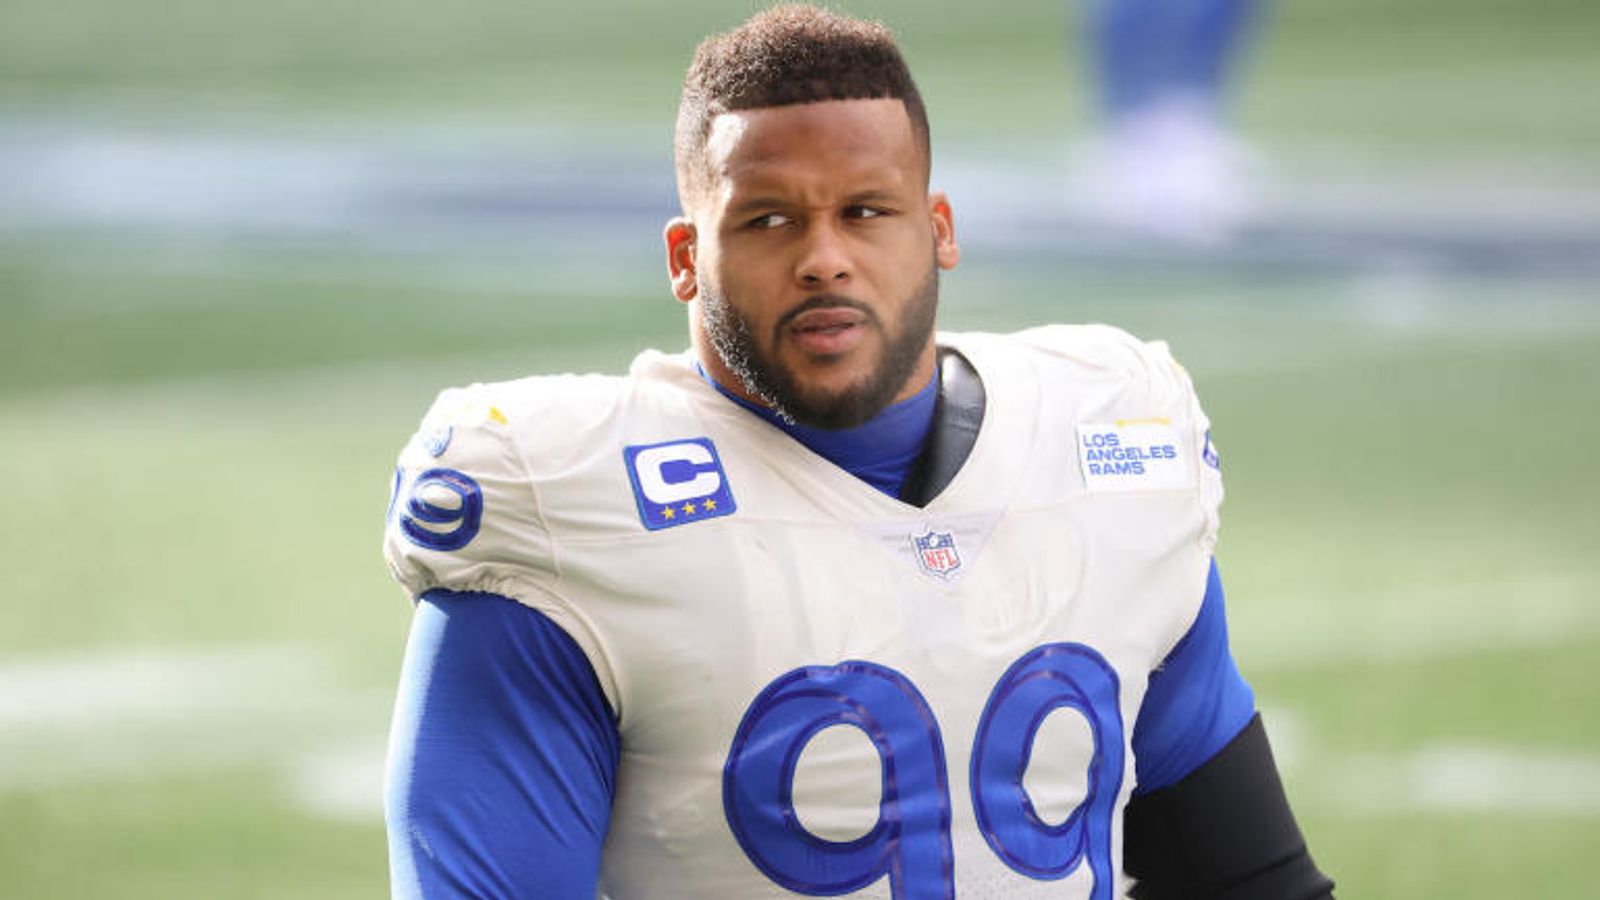 Aaron Donald on TJ Watt: 'He can probably be an MVP this year'